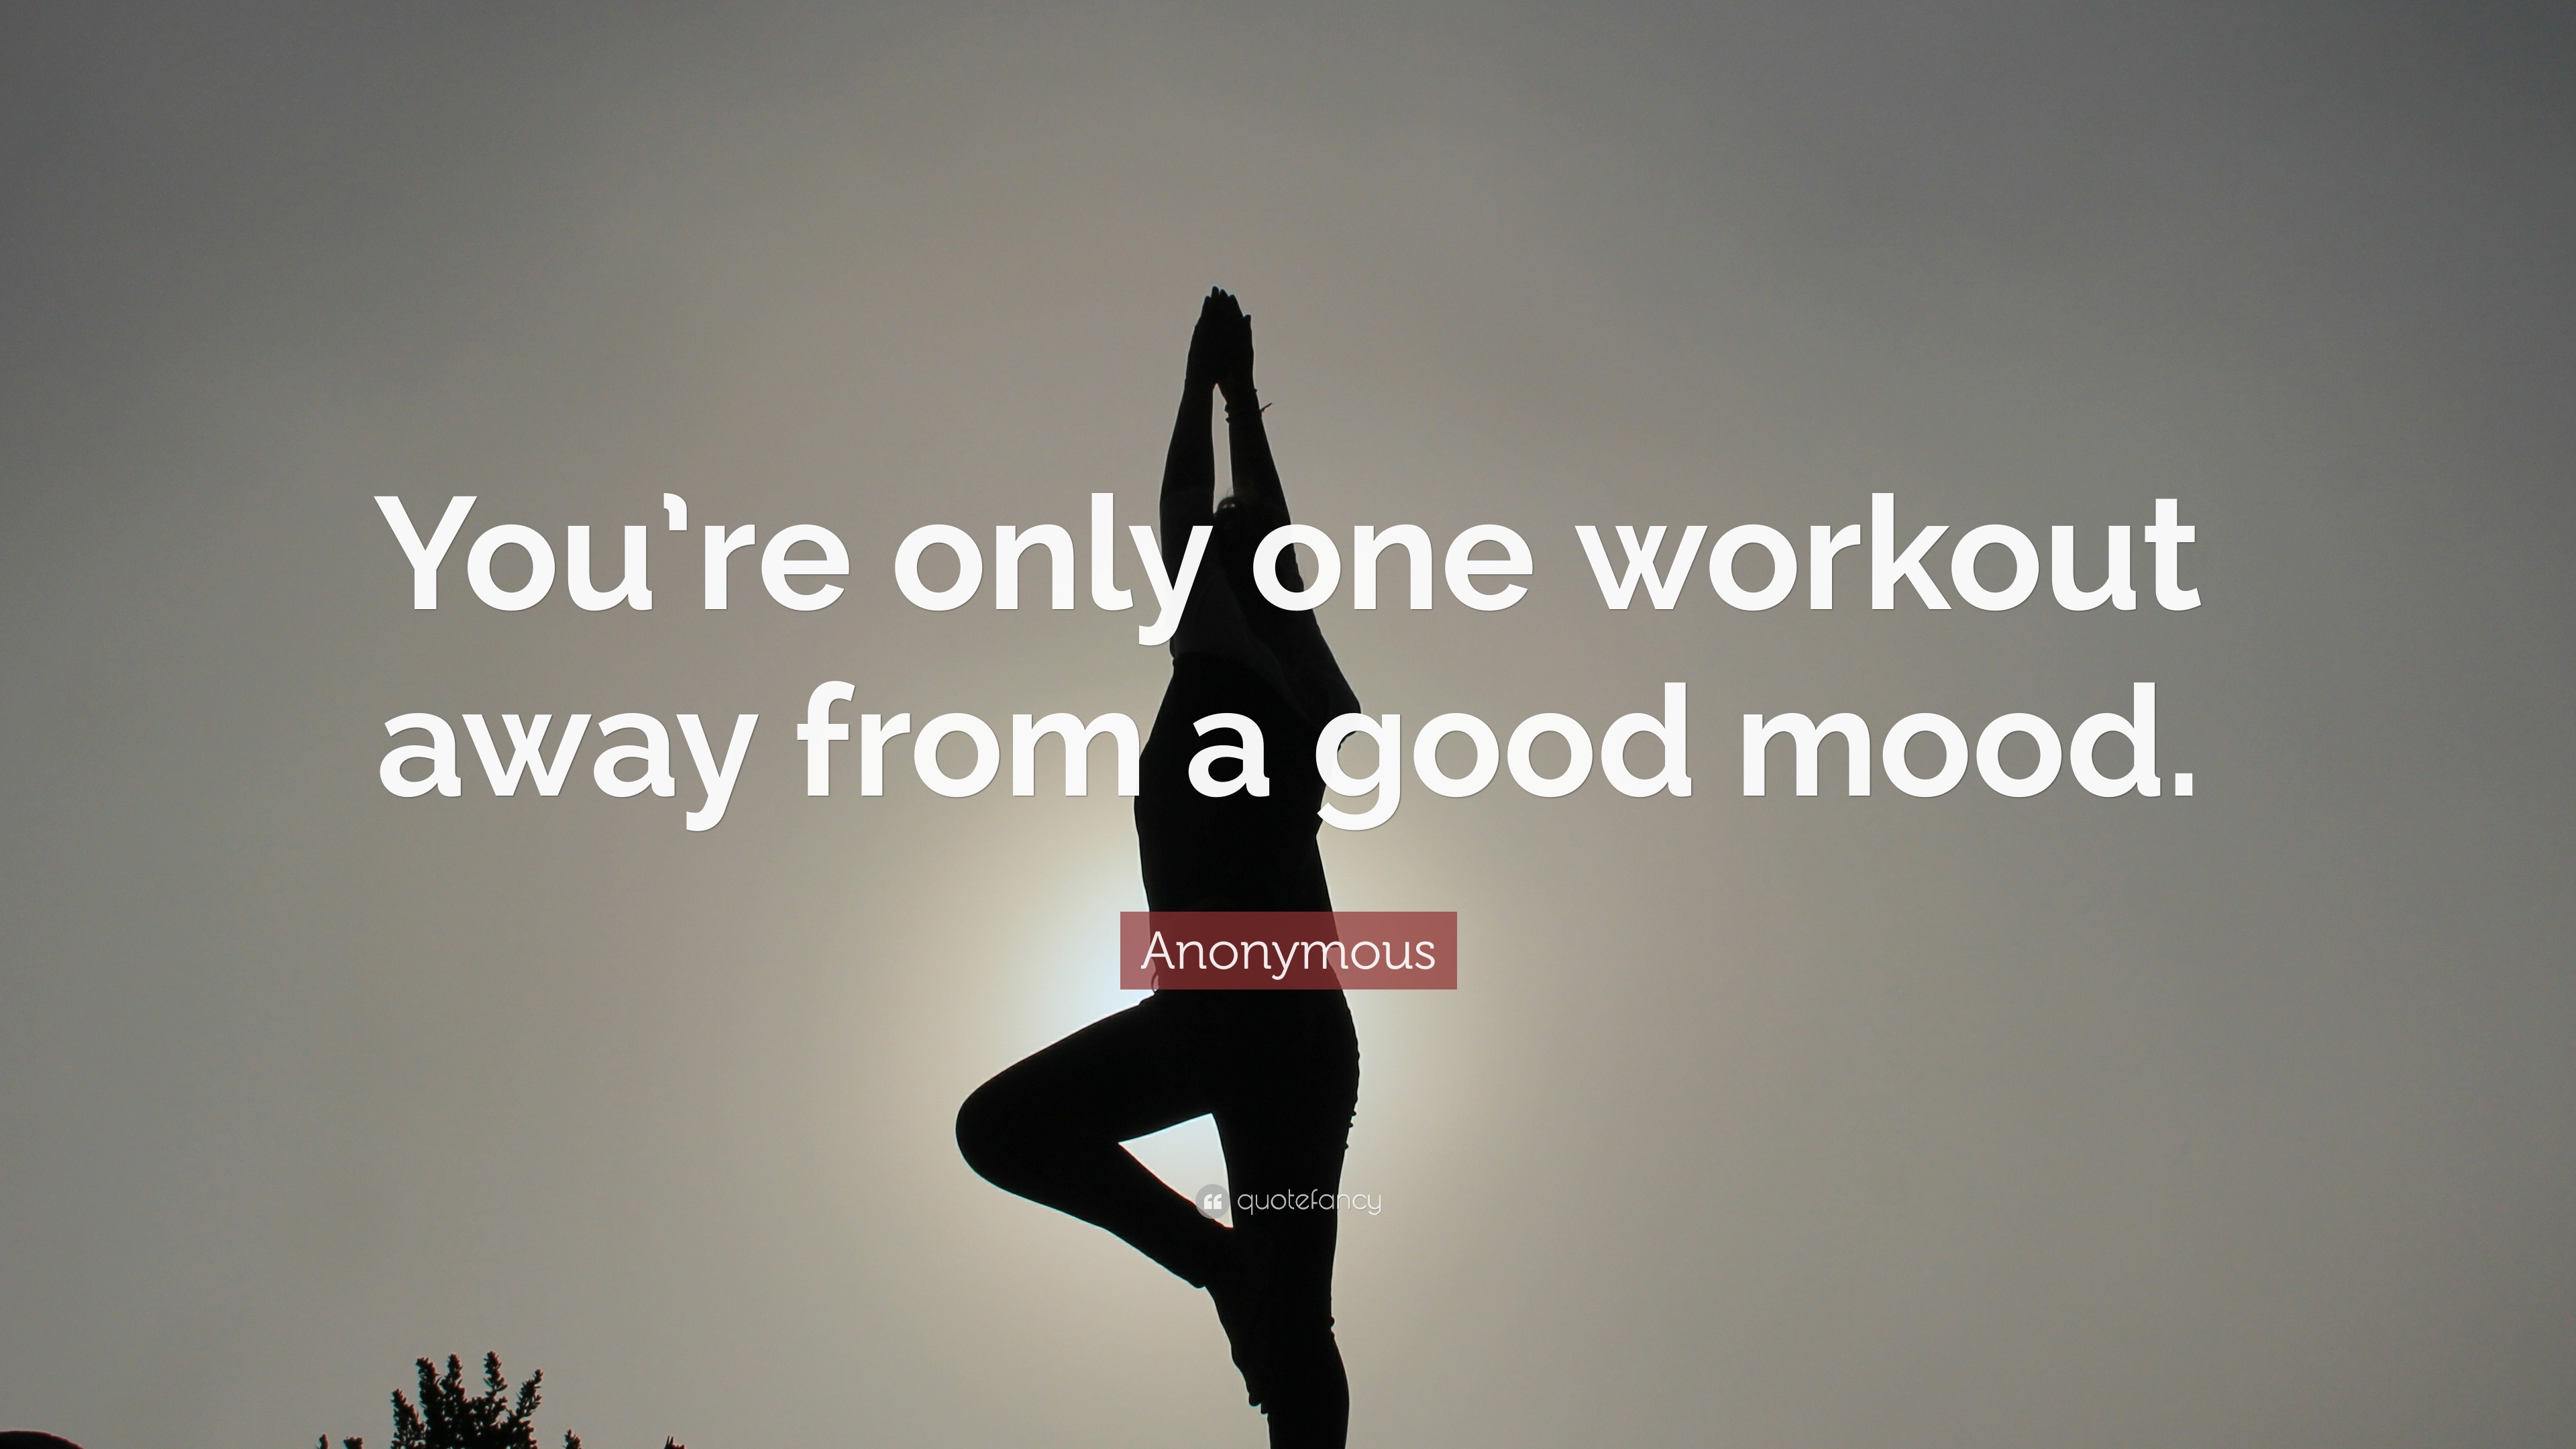 Anonymous Quote: “You’re only one workout away from a good mood.” (33